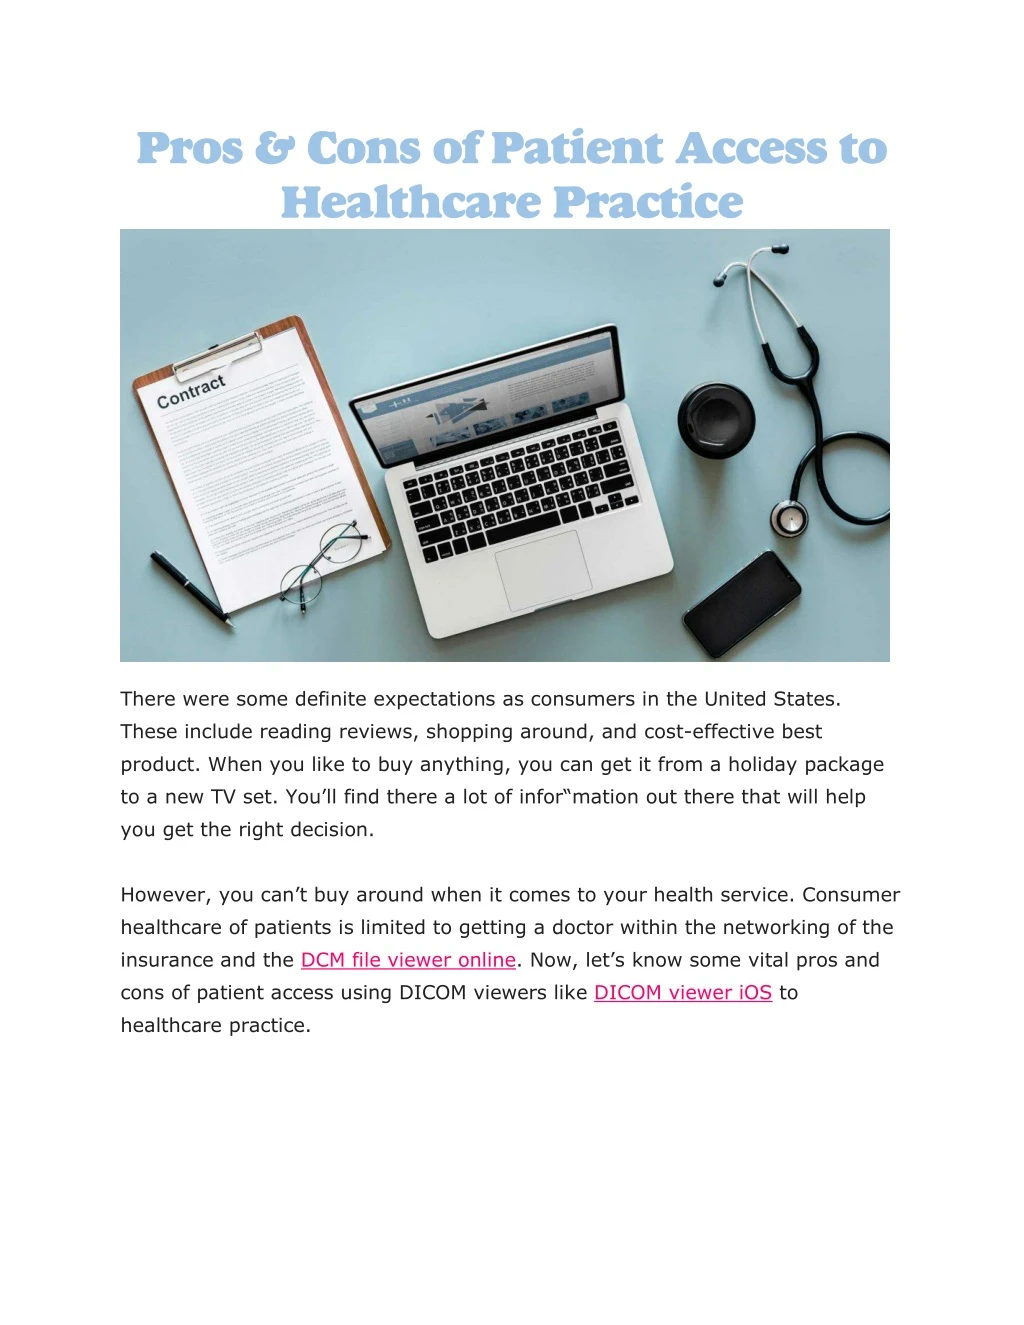 pros cons of patient access to healthcare practice